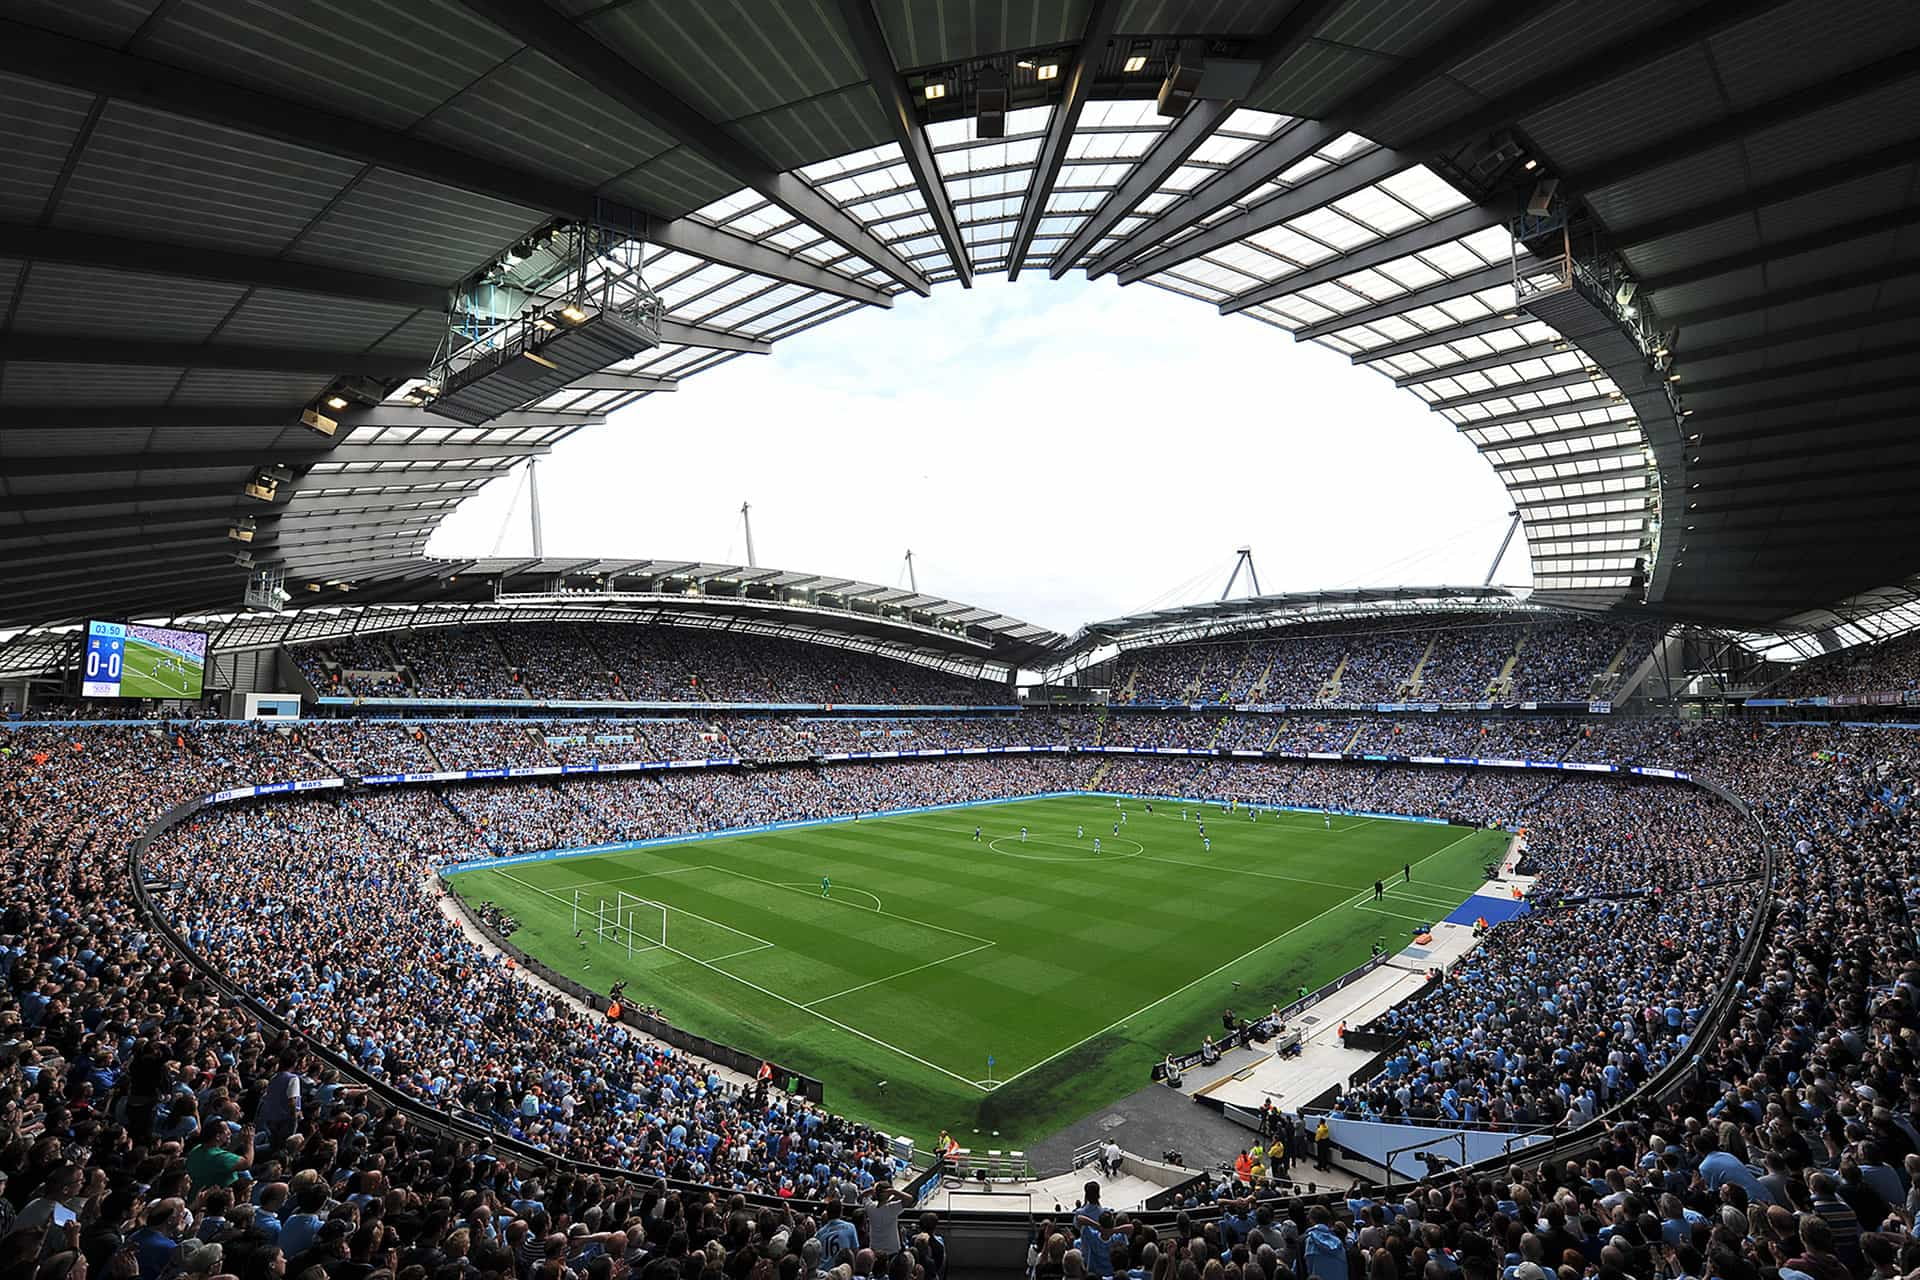 Manchester City - BSC Young Boys (CL), 2 Novemberum 20:00